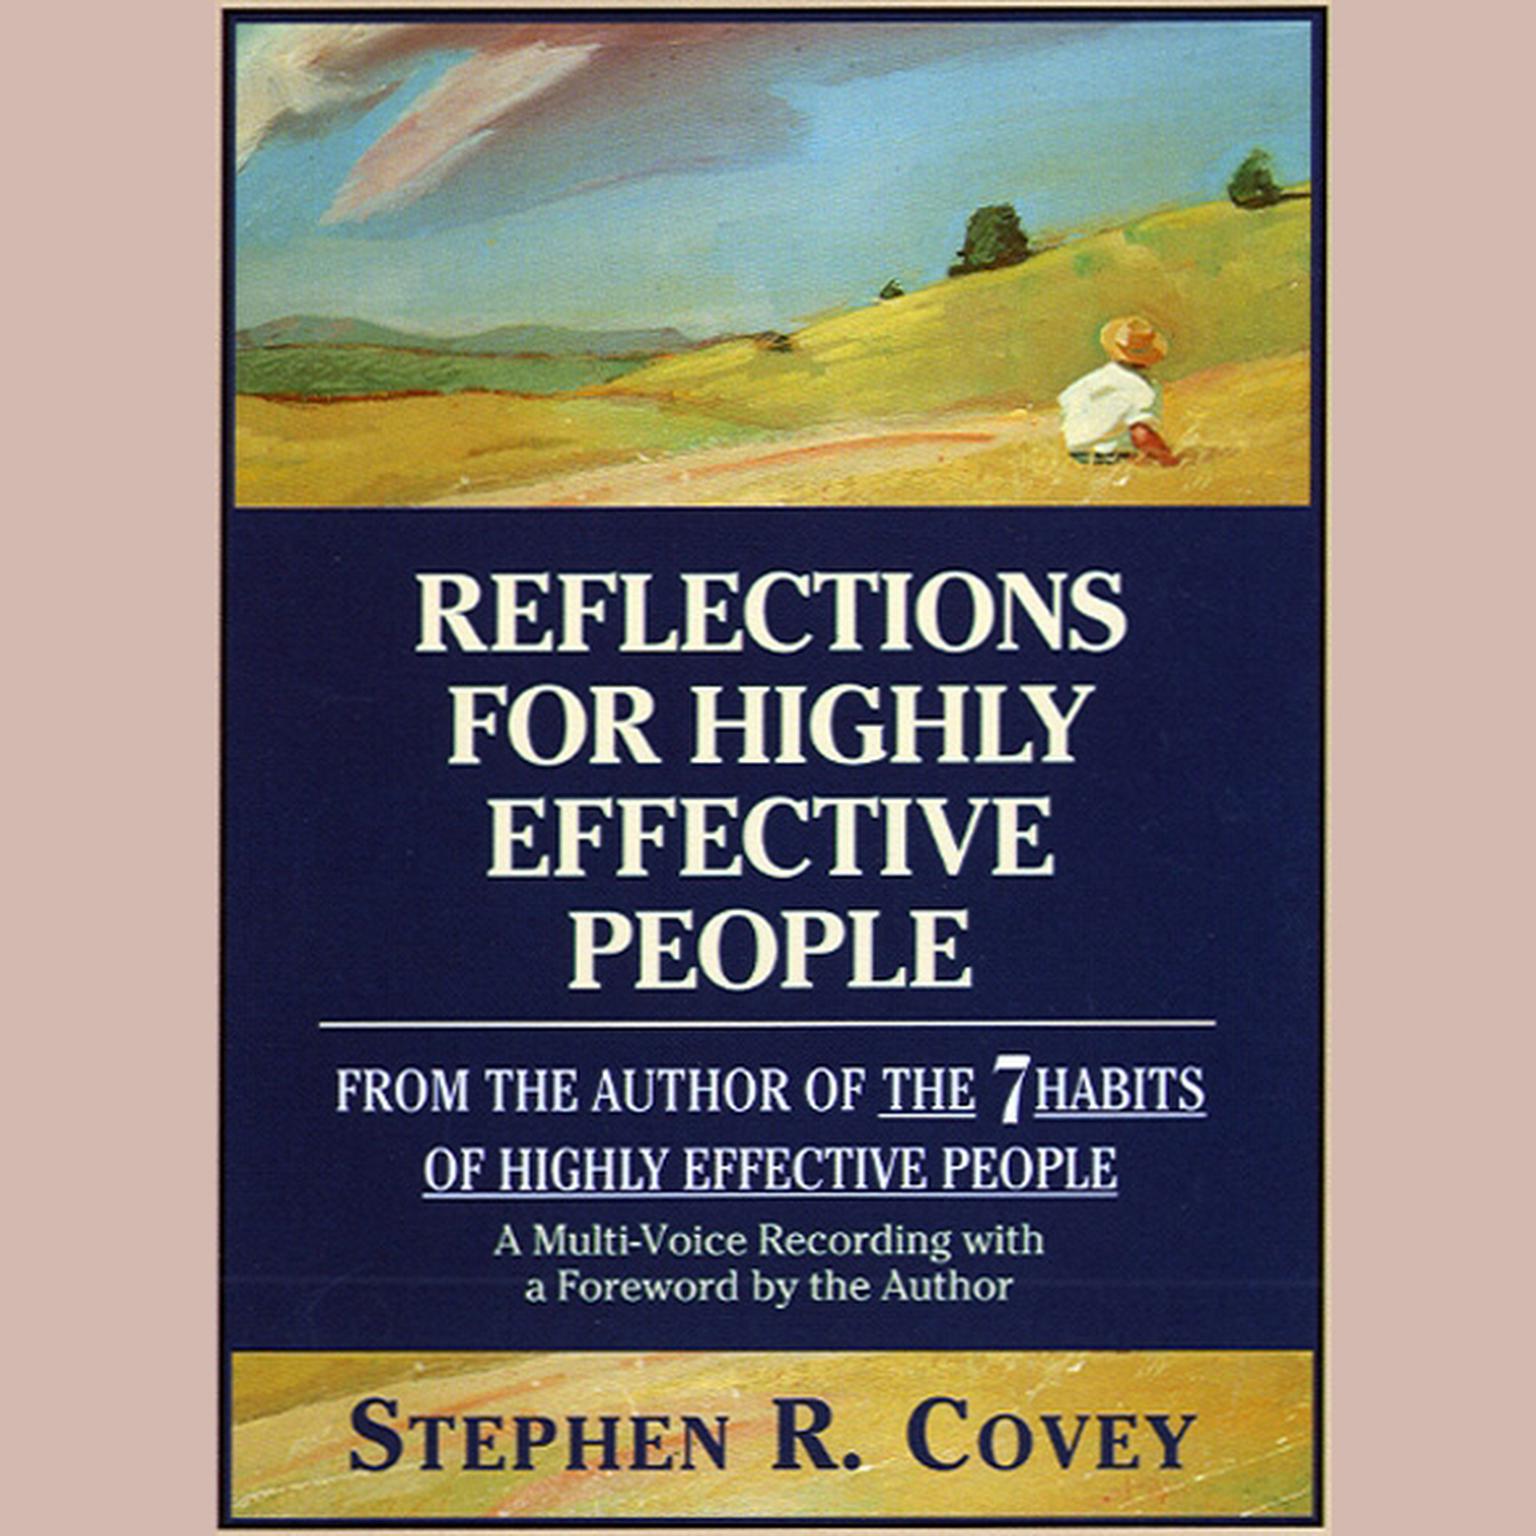 Reflections for Highly Effective People (Abridged) Audiobook, by Stephen R. Covey